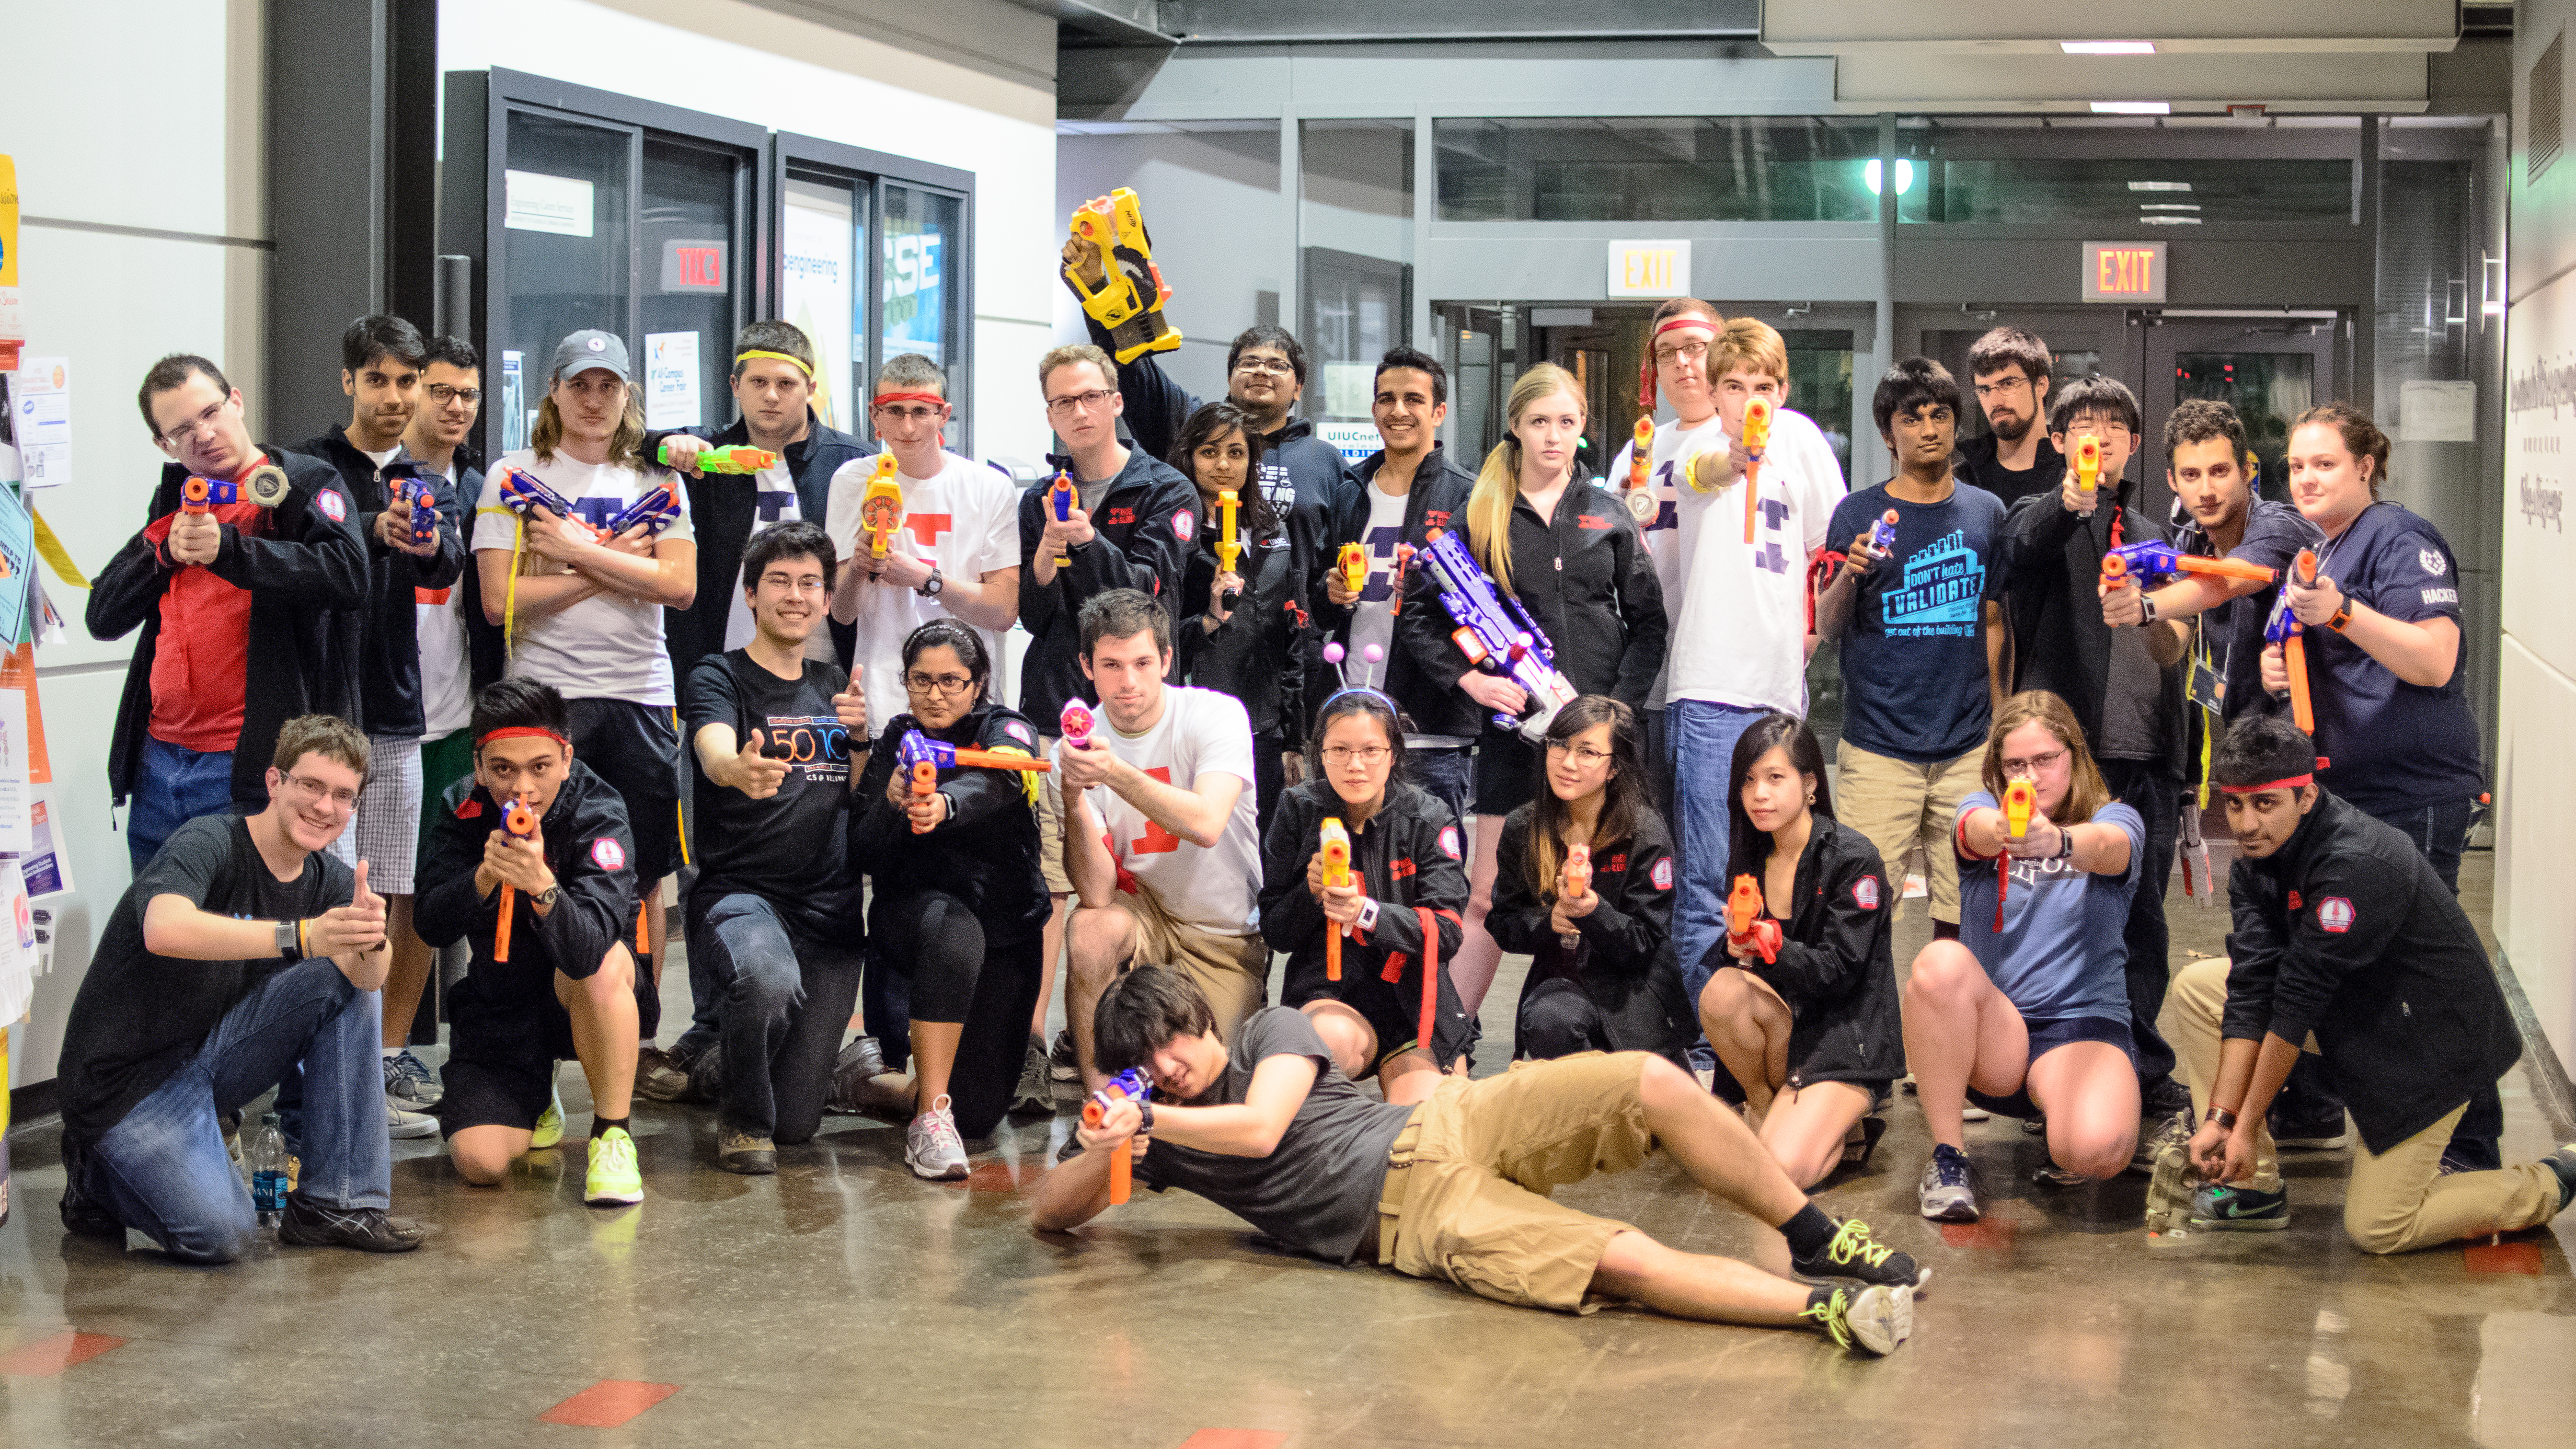 The HackIllinois 2014 staff gears up for the inaugural Nerf mini-event. Photo by Priten Vora.